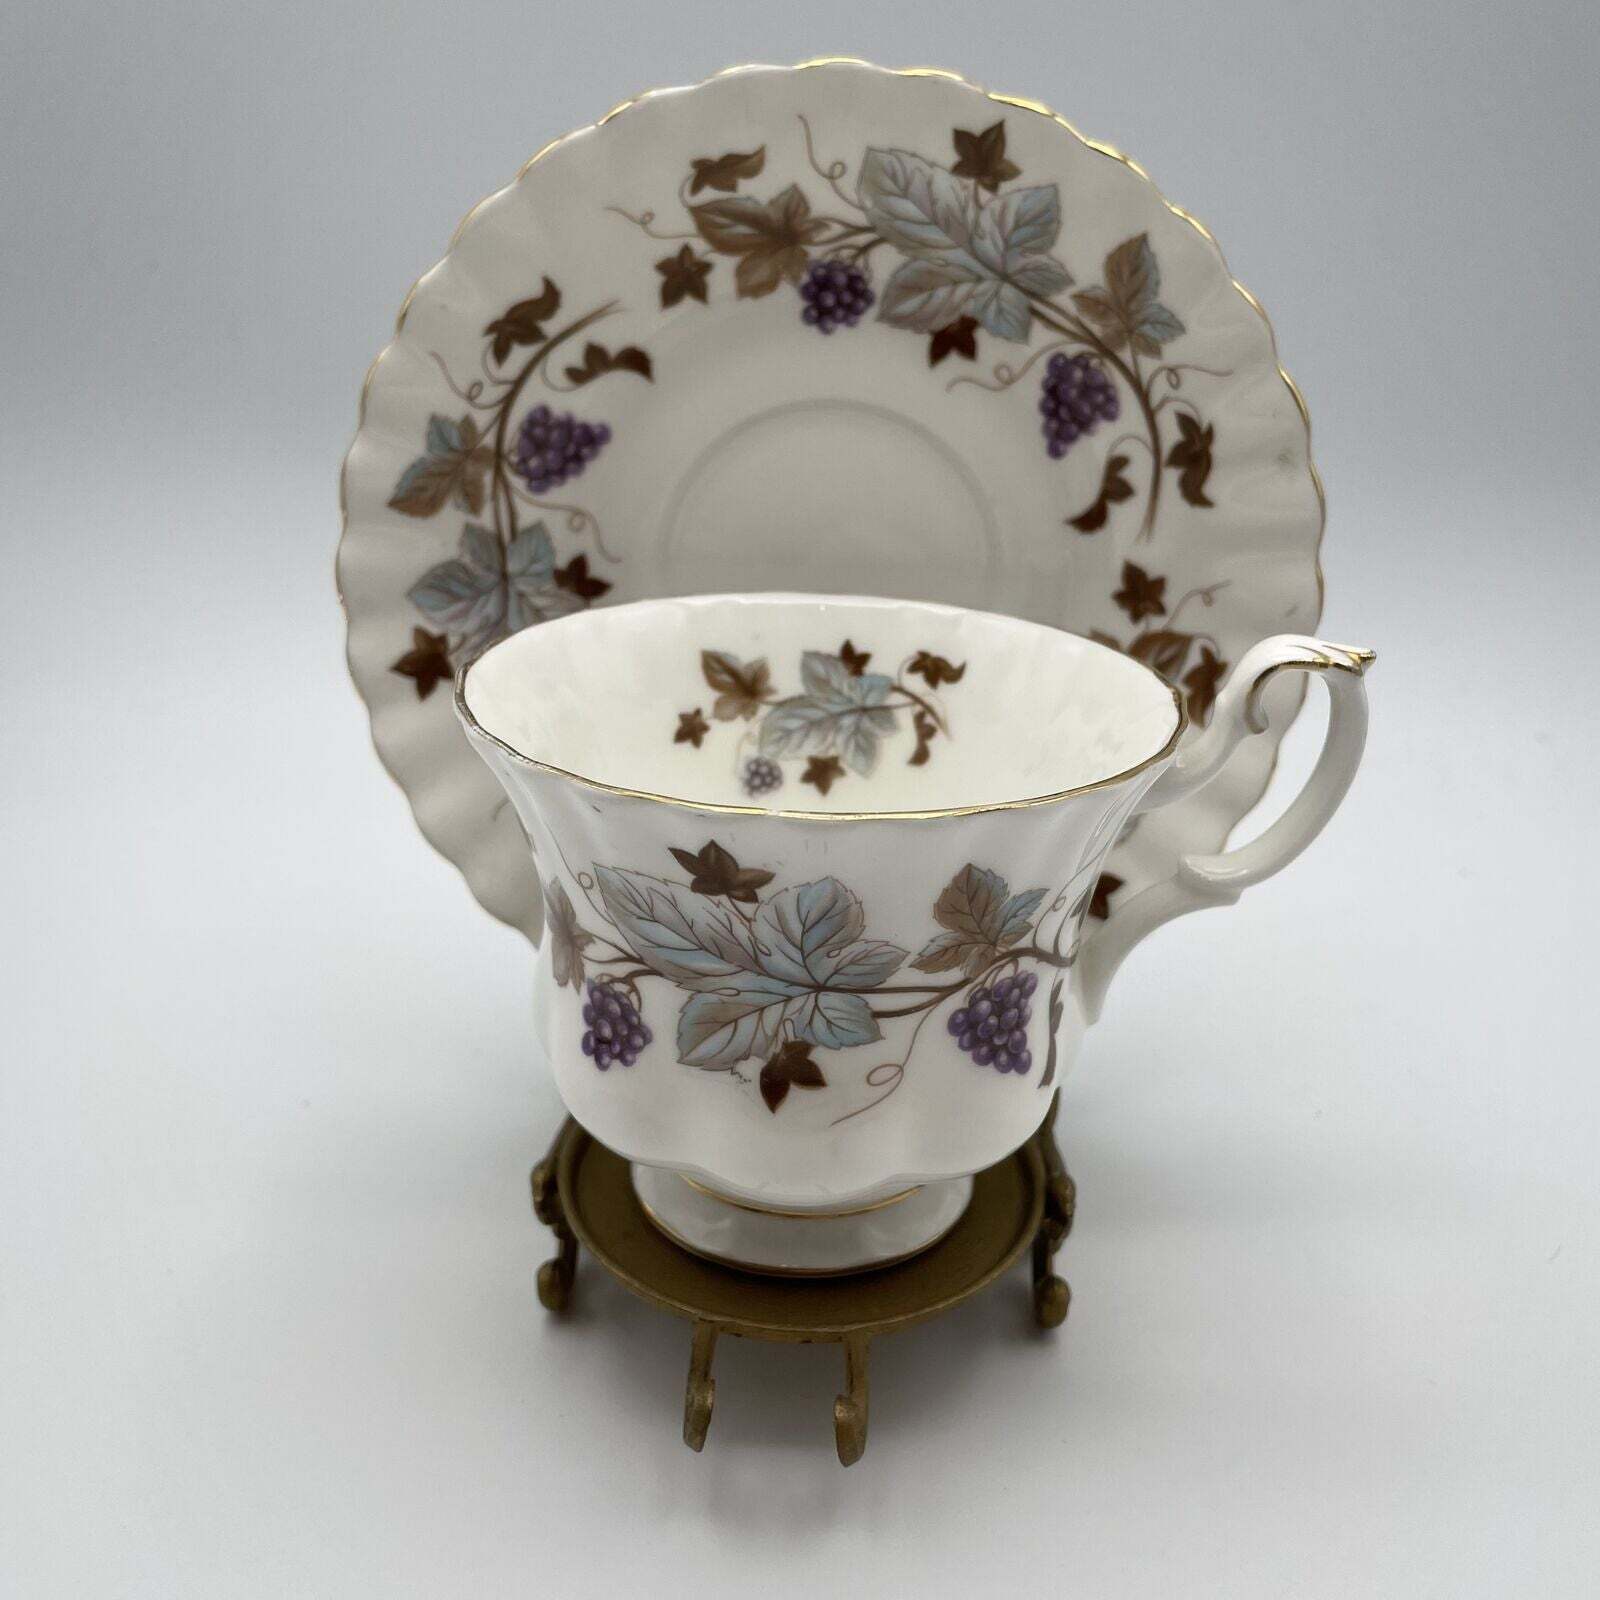 Vintage Royal Albert Tea Cup and Saucer with Grapes & Blue/Brown Leaves